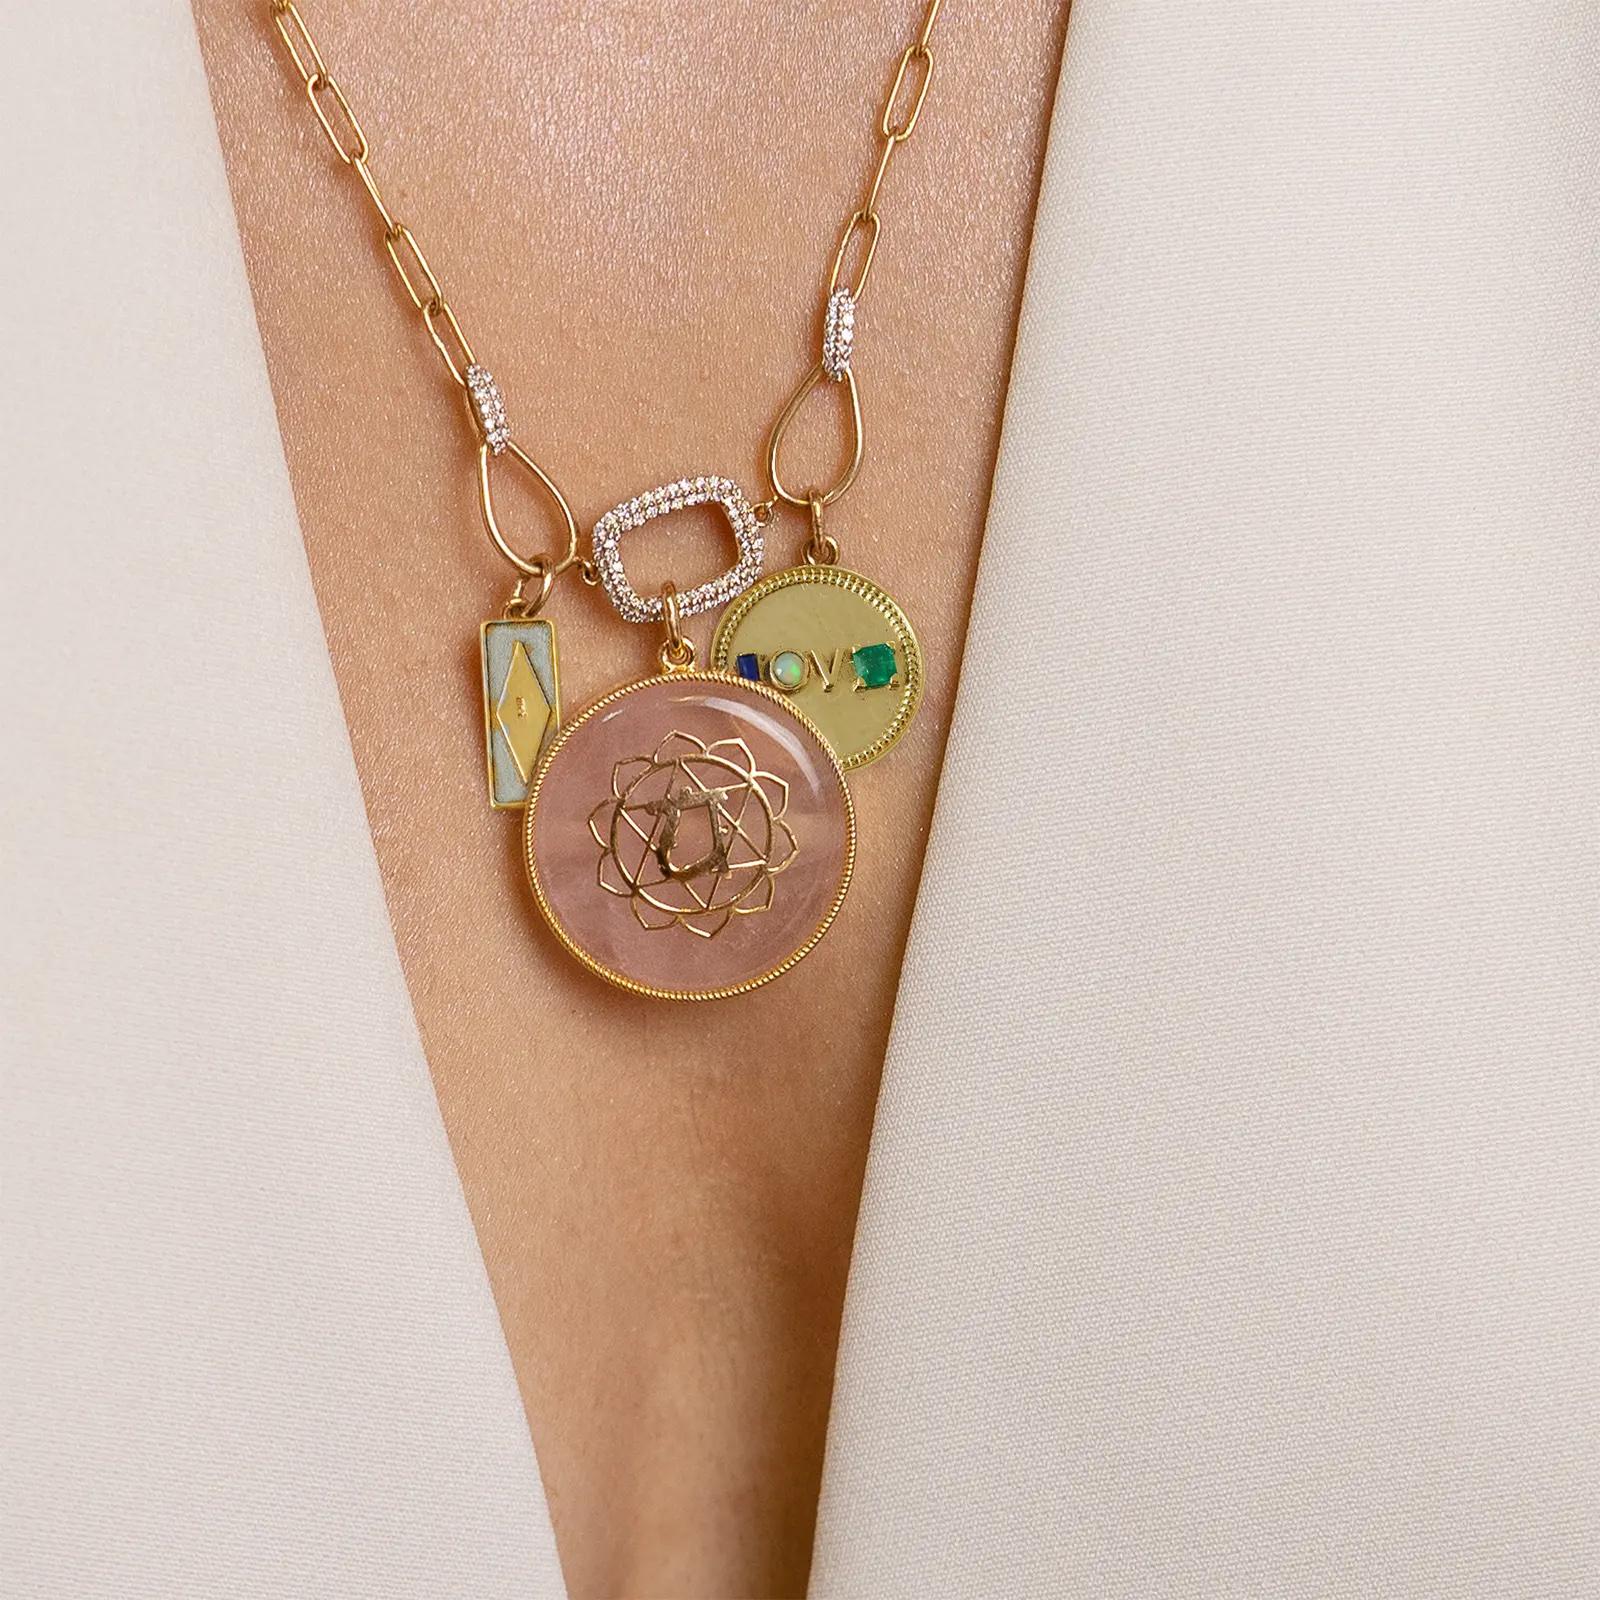 Gold(14K) : 14.15g
Diamonds : (VS clarity & H-I colour) : (Brilliant cut ) : 0.35ct
Gemstones : Rose Quartz, Emerald, Opal, Lapiz Lazuli

Anah Rose Pendant Necklace is a celebration of all things Love—love for yourself, for your dear ones, and for